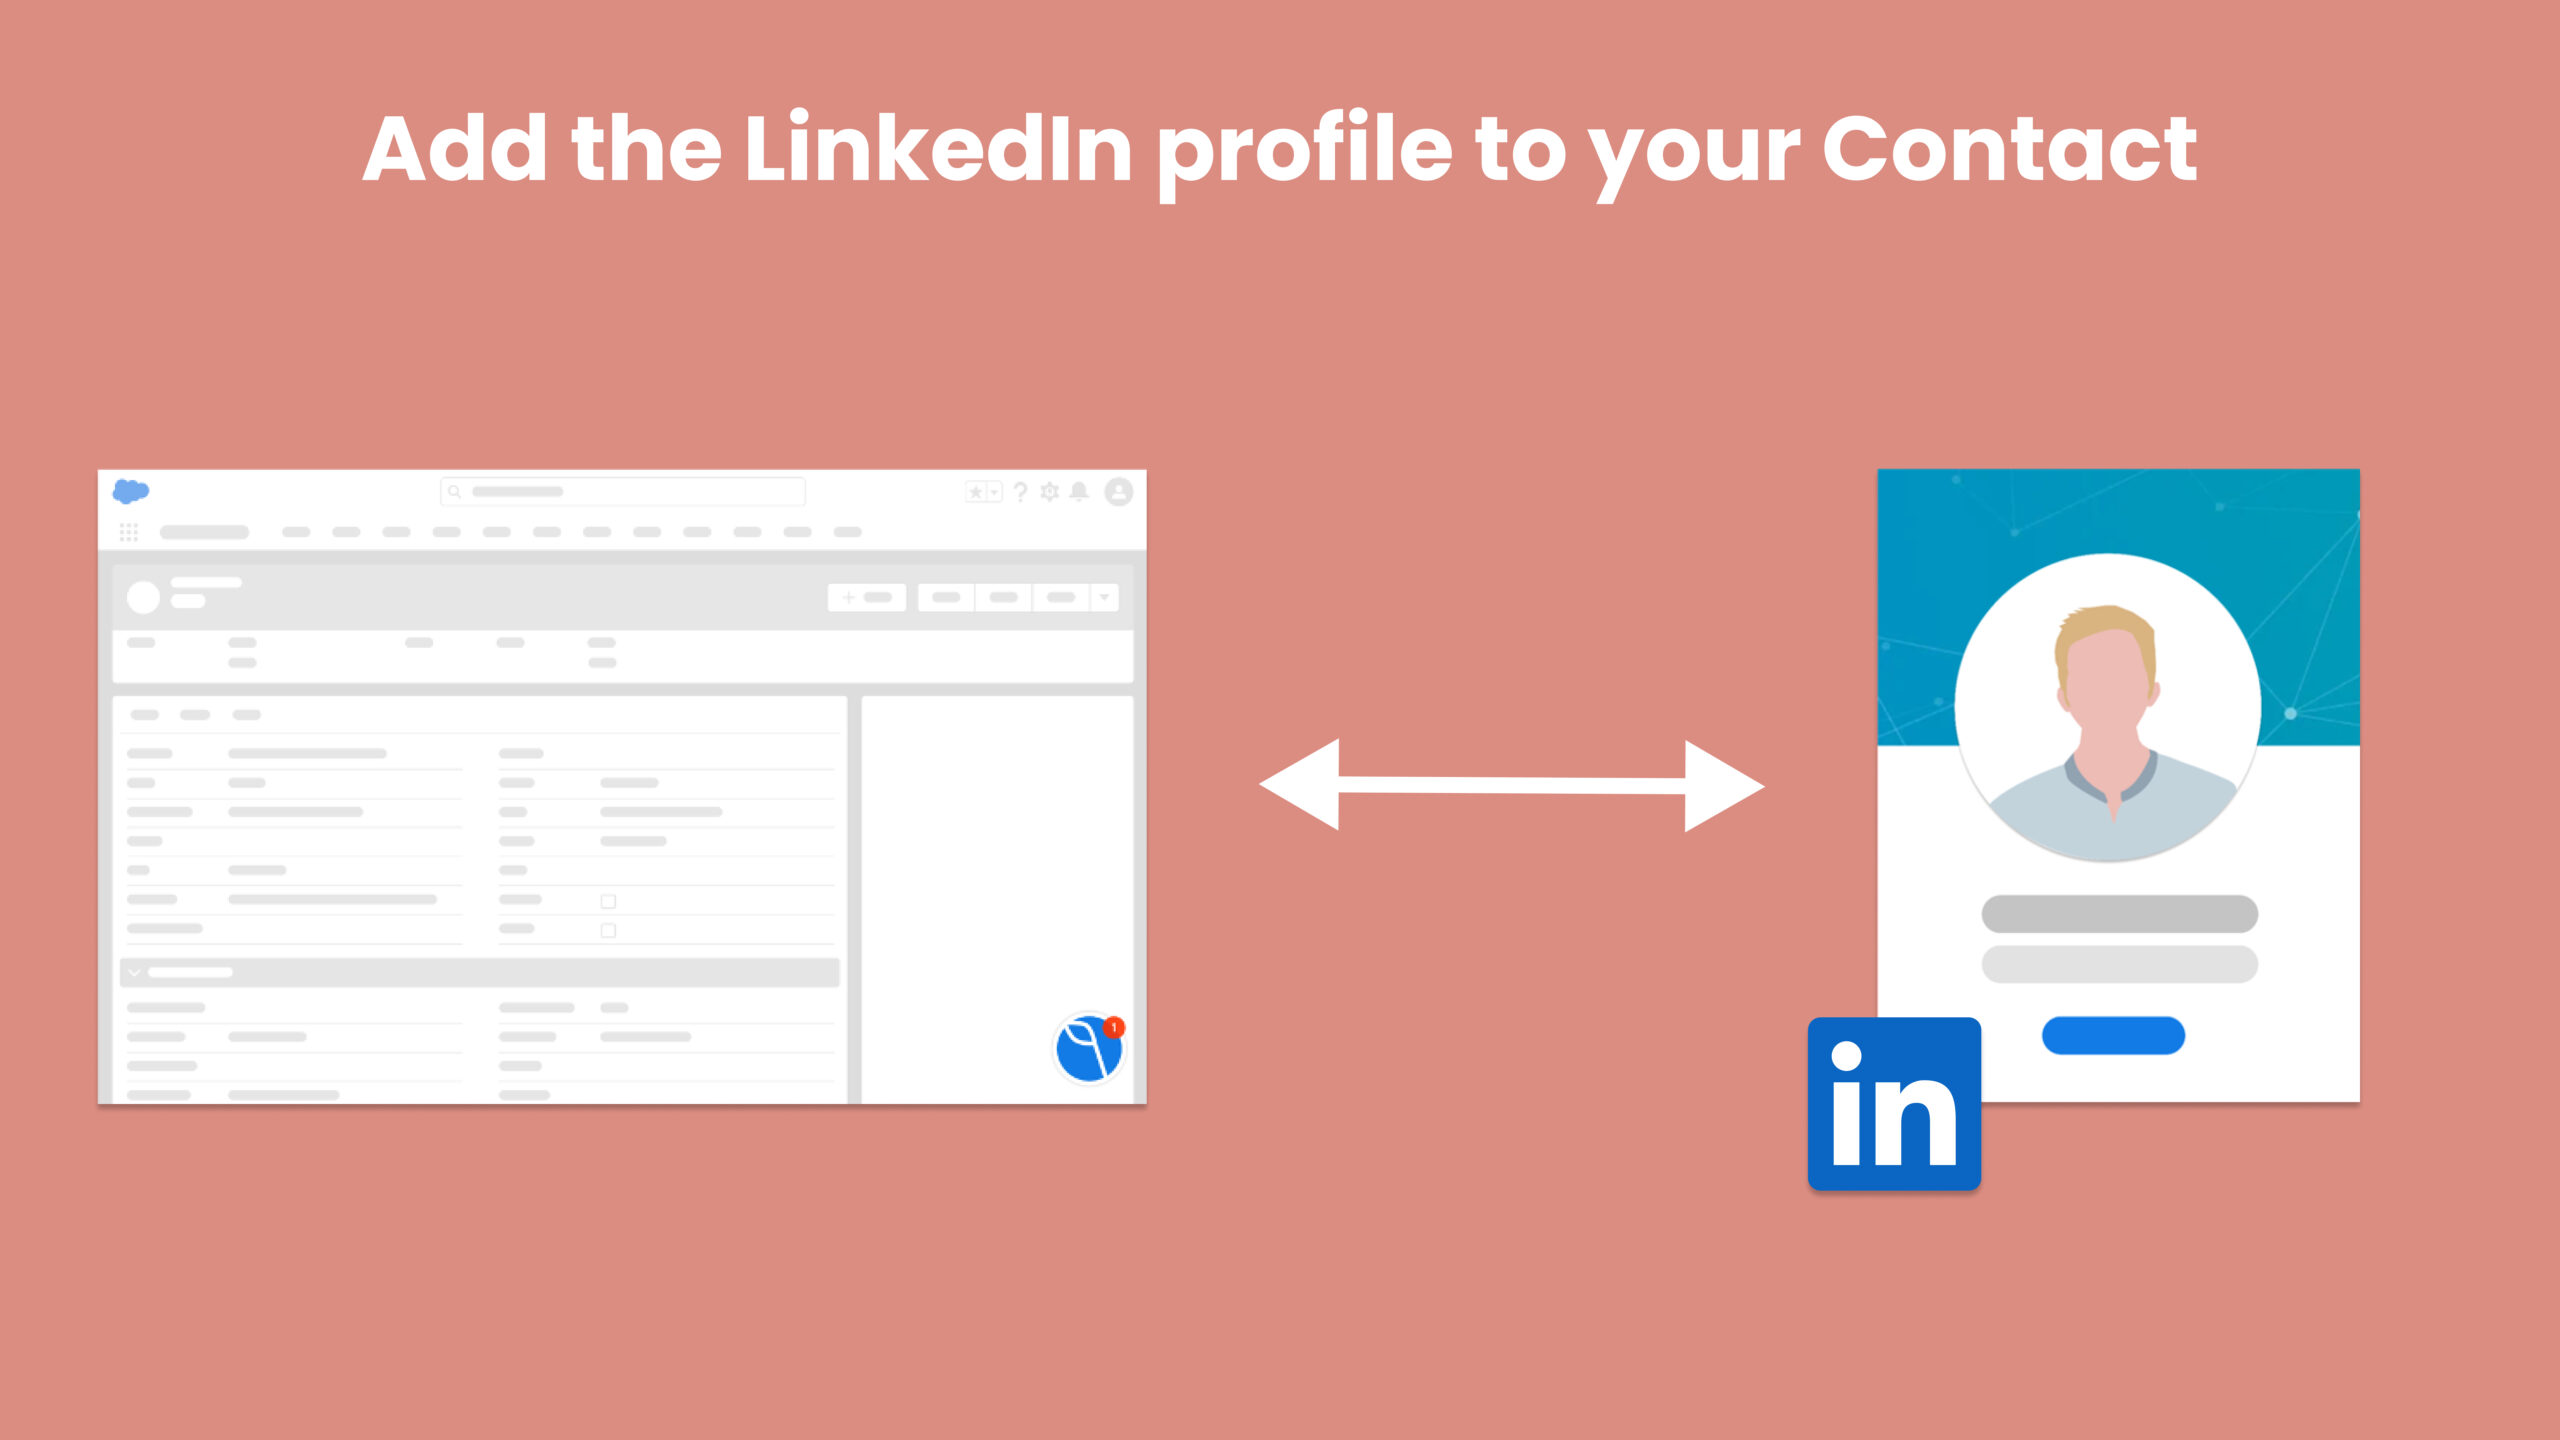 This image shows how Delpha can import data from LinkedIn into your Salesforce contacts.